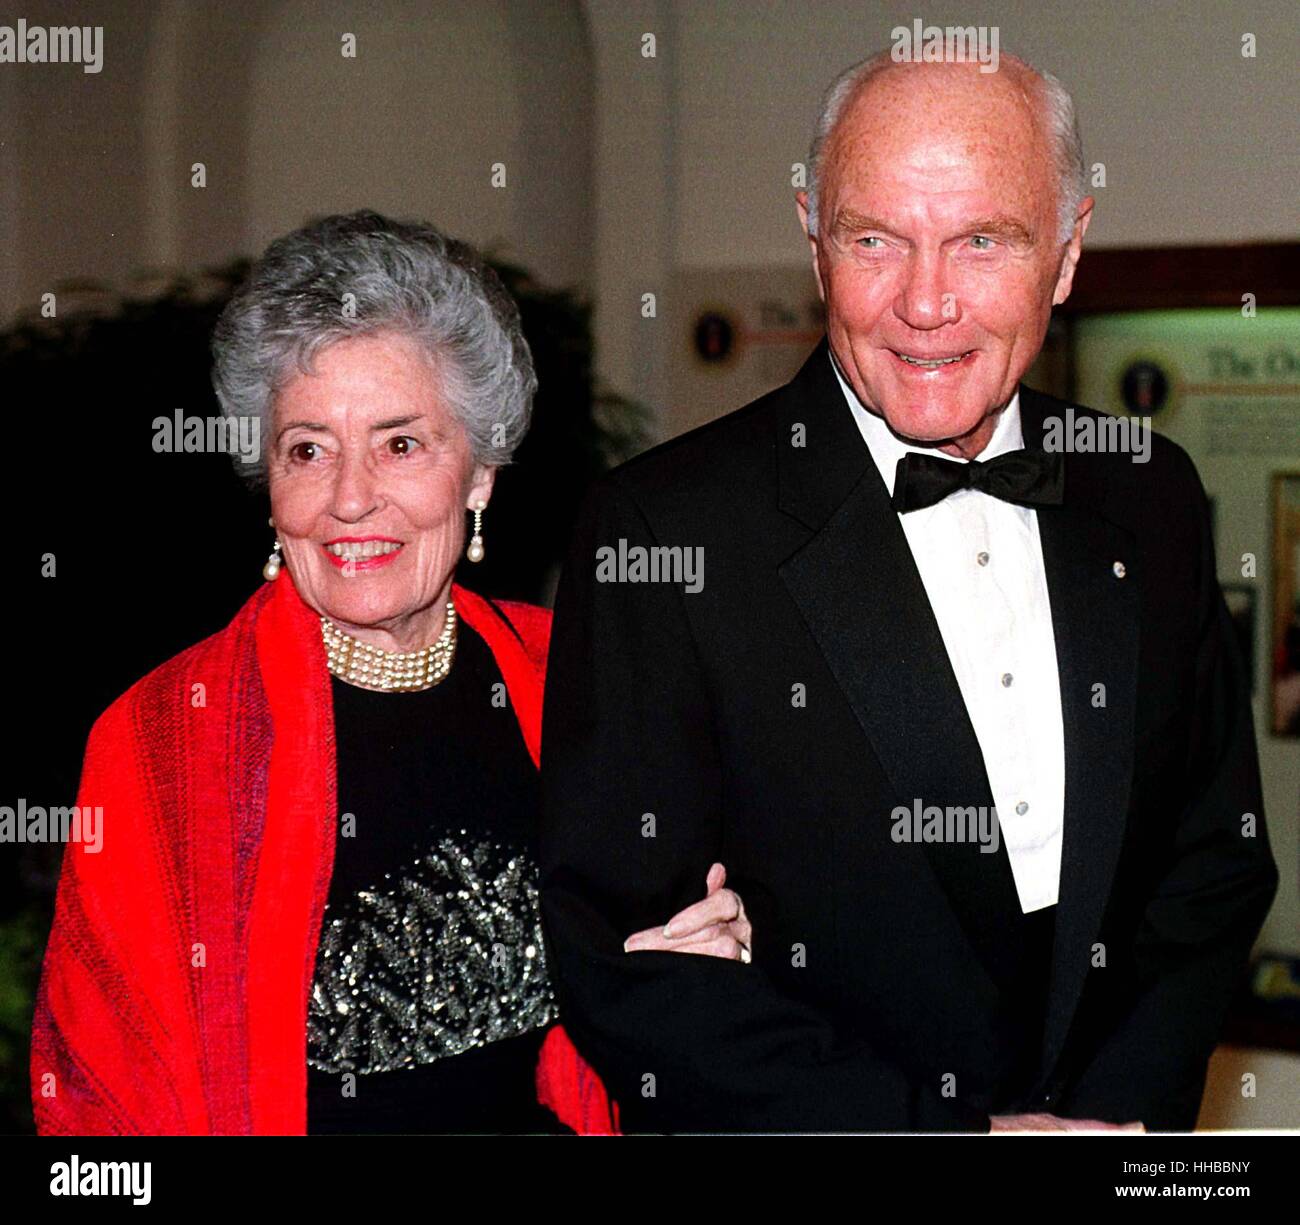 United States Senator John H. Glenn (Democrat of Ohio) and his wife, Annie, arrive at The White House for the State Dinner honoring President Jiang Zemin of China at the White House in Washington, D.C. on October 29, 1997..Credit: Ron Sachs / CNP. /MediaPunch Stock Photo